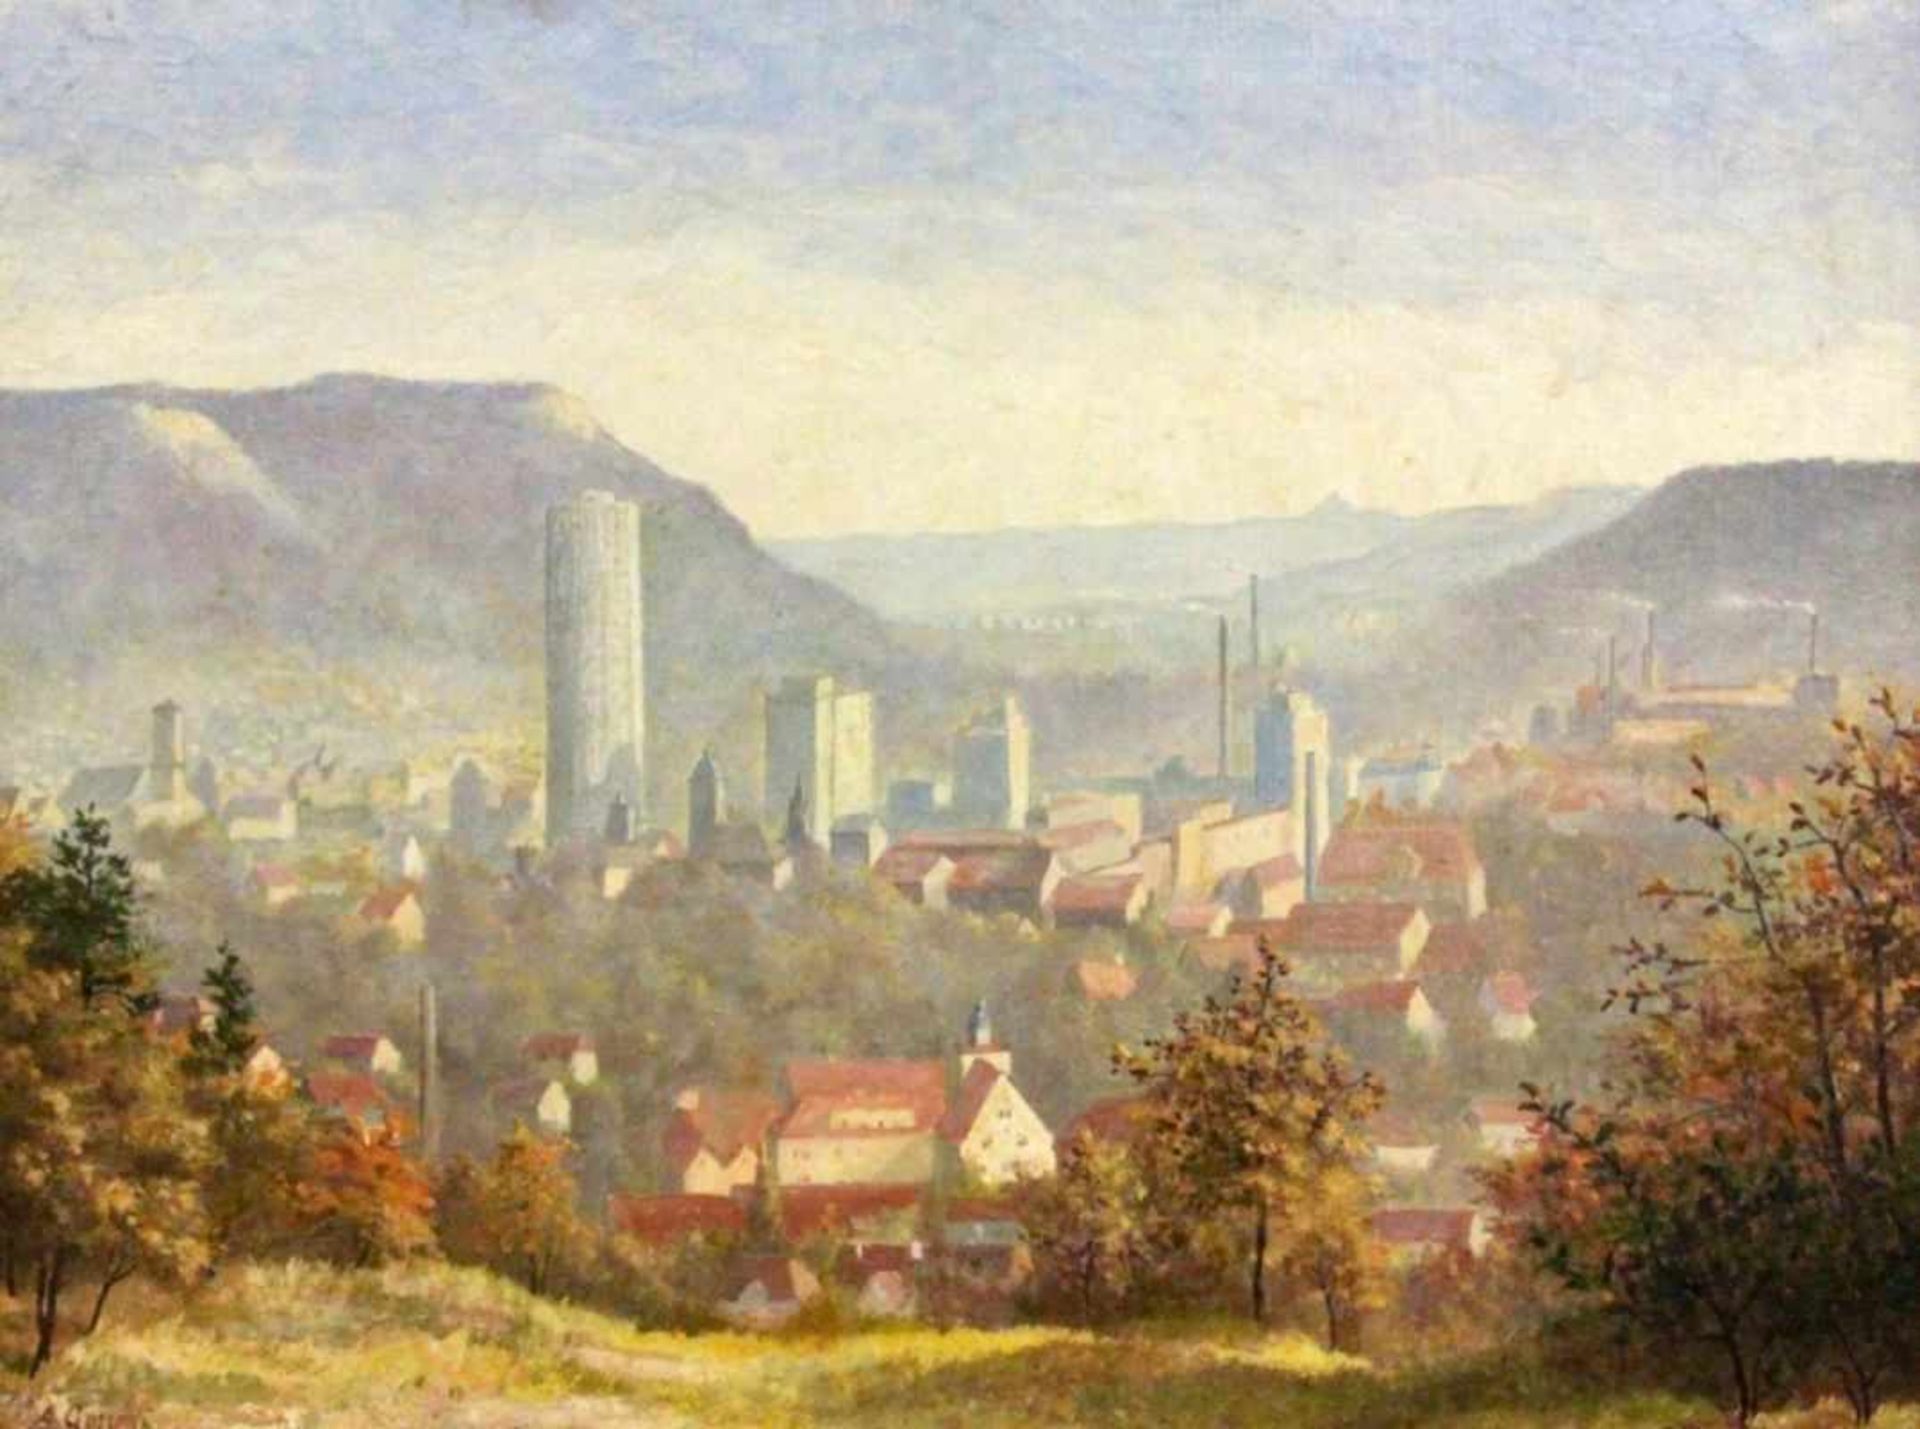 GOSSRAN, A. (?) 20th century City with Industrial Plant. Oil on panel, indistinctlysigned. 36 x 48